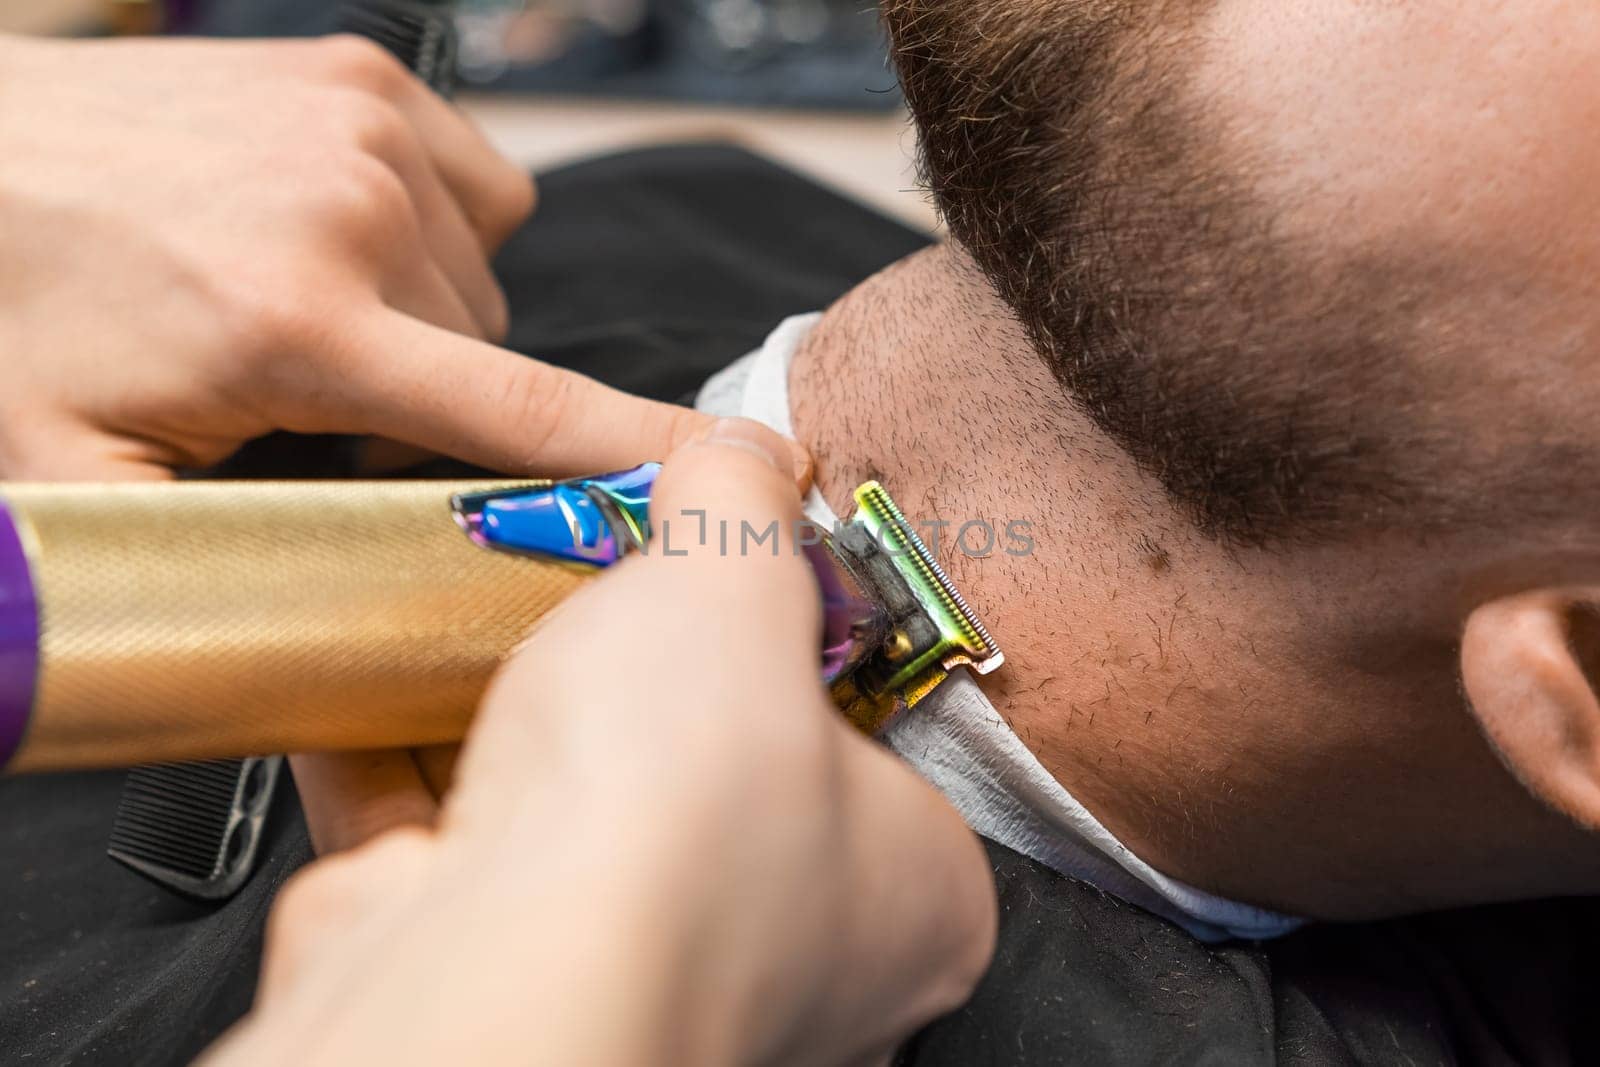 At the barbershop, the master effortlessly trims the clients beard using an automatic trimmer